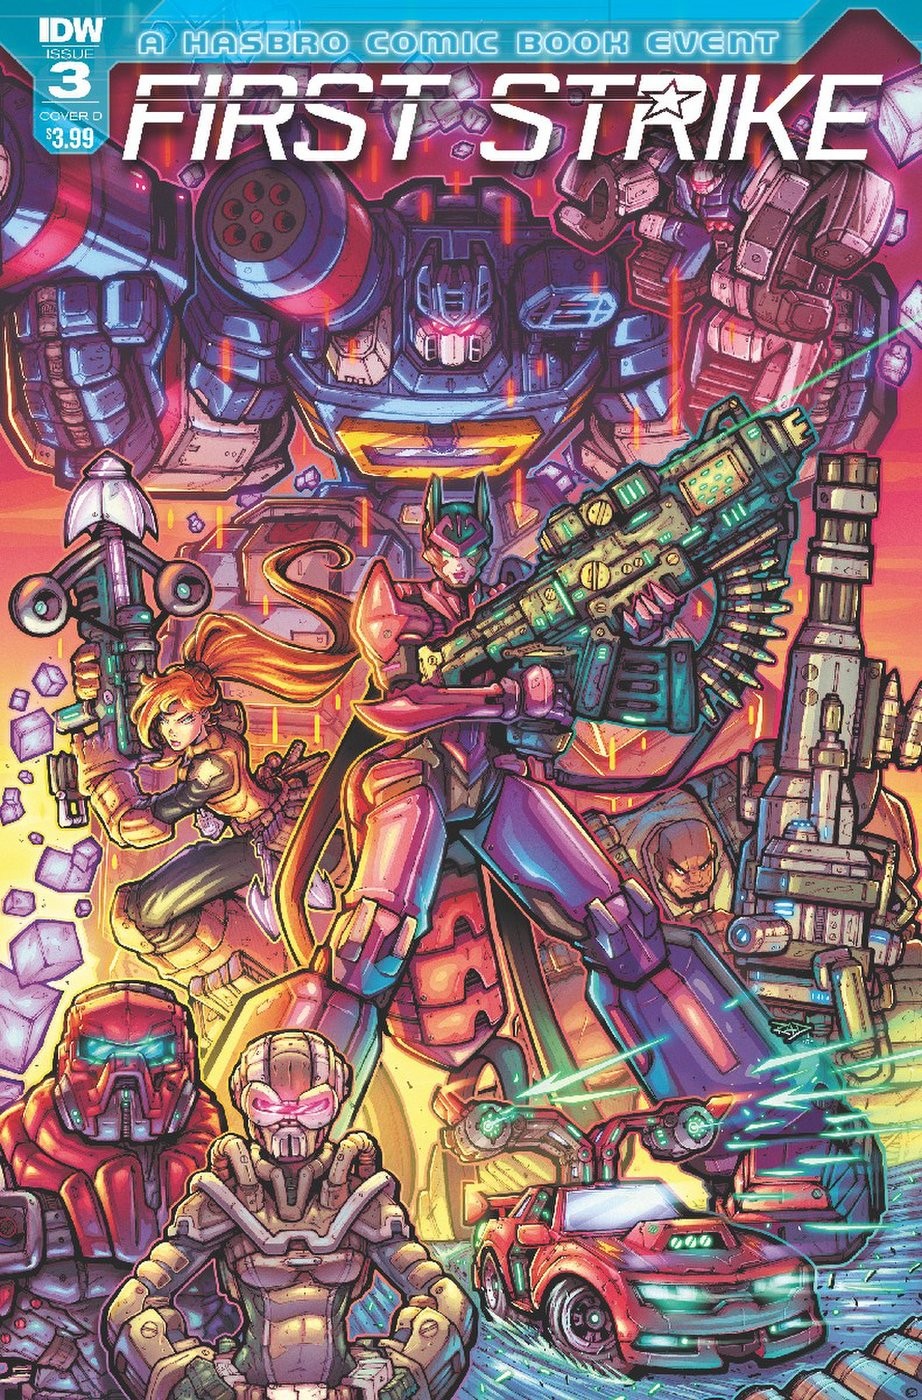 Transformers News: Variant Covers for IDW Hasbro Universe First Strike #3 and #4